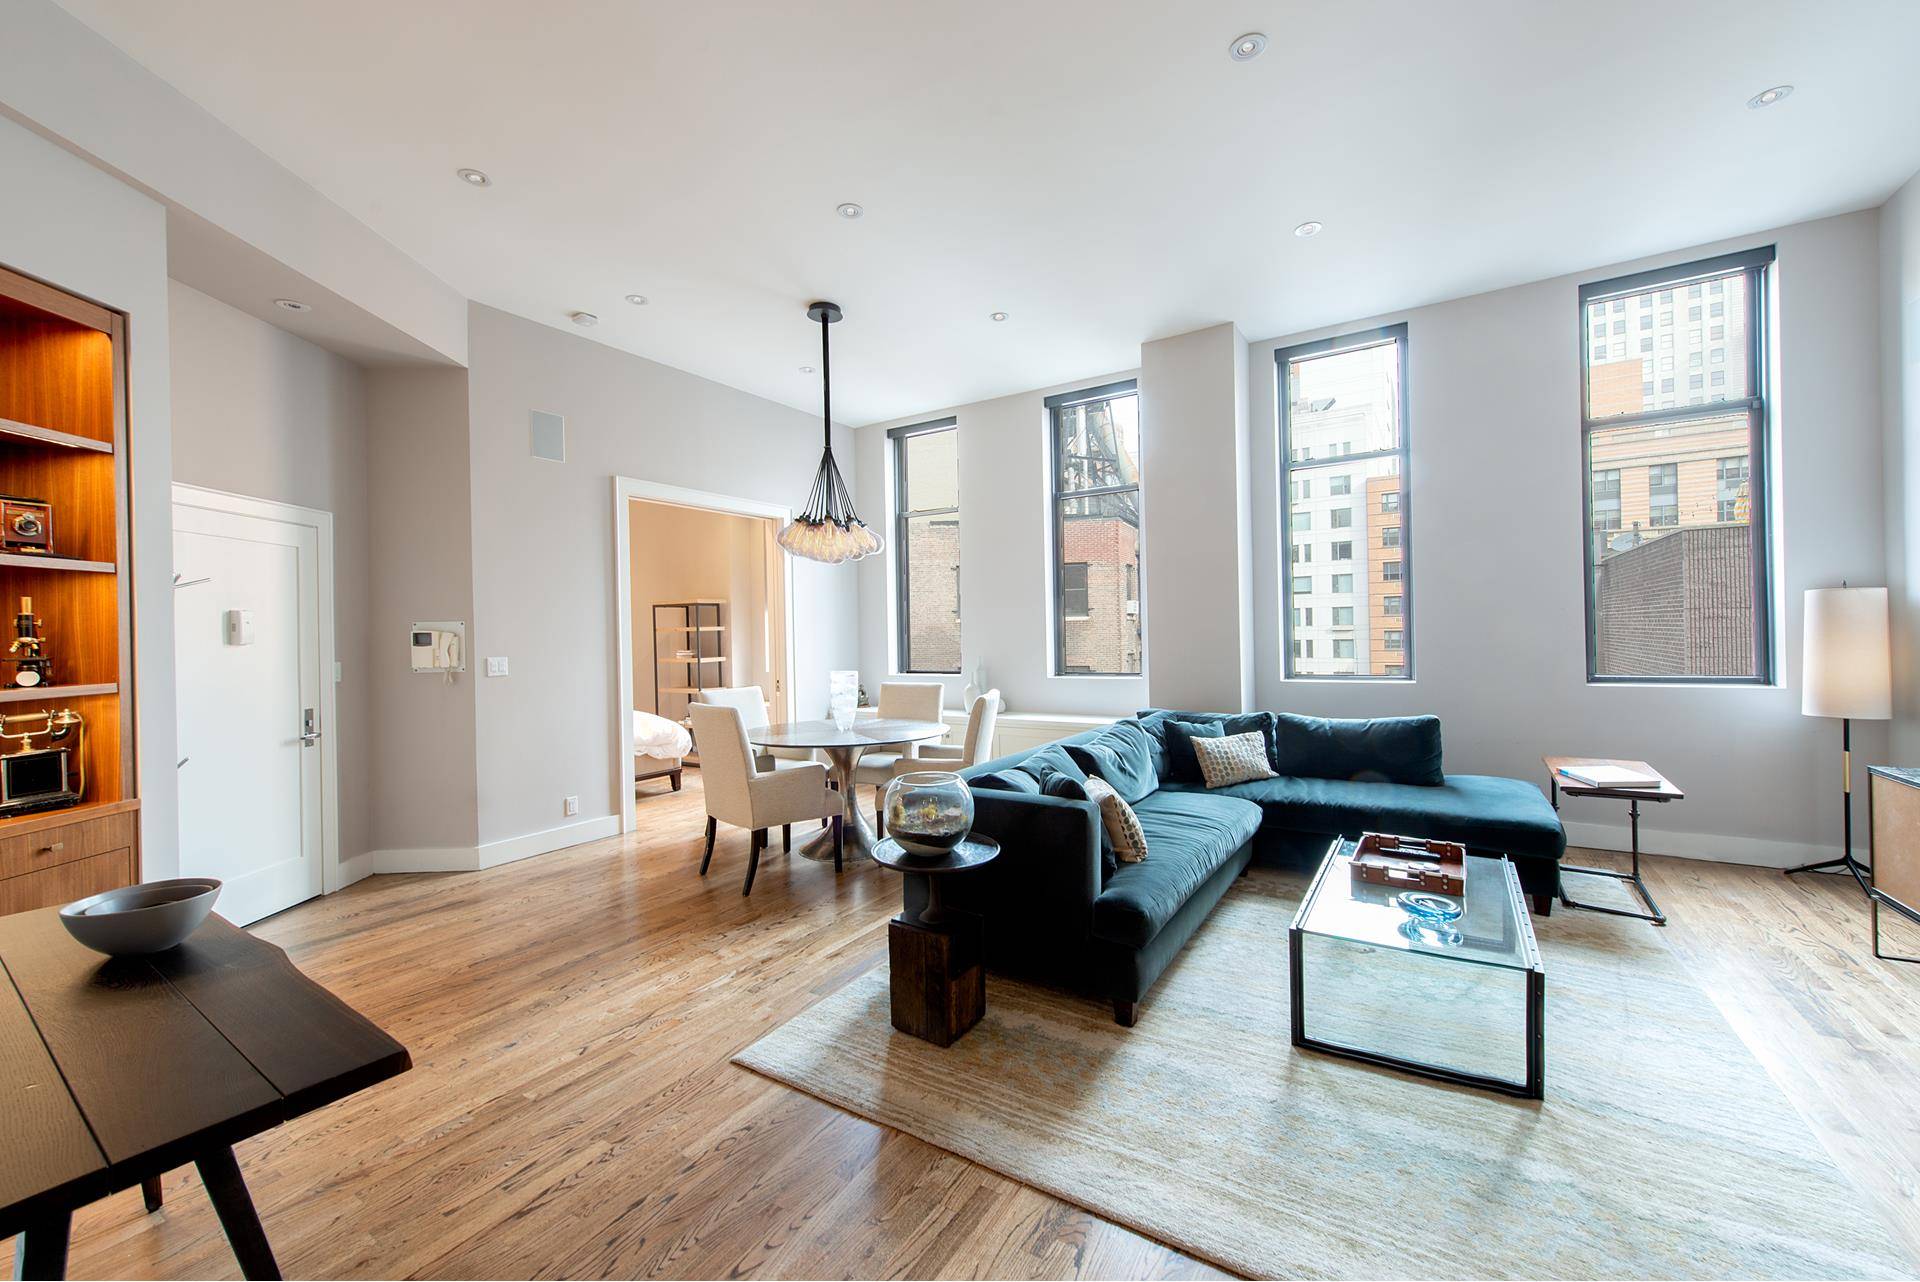 This truly triple mint Prewar condo two bedroom loft in the heart of Greenwich Village, just steps from Union Square, has been recently and lovingly renovated, with redone bathrooms and ...